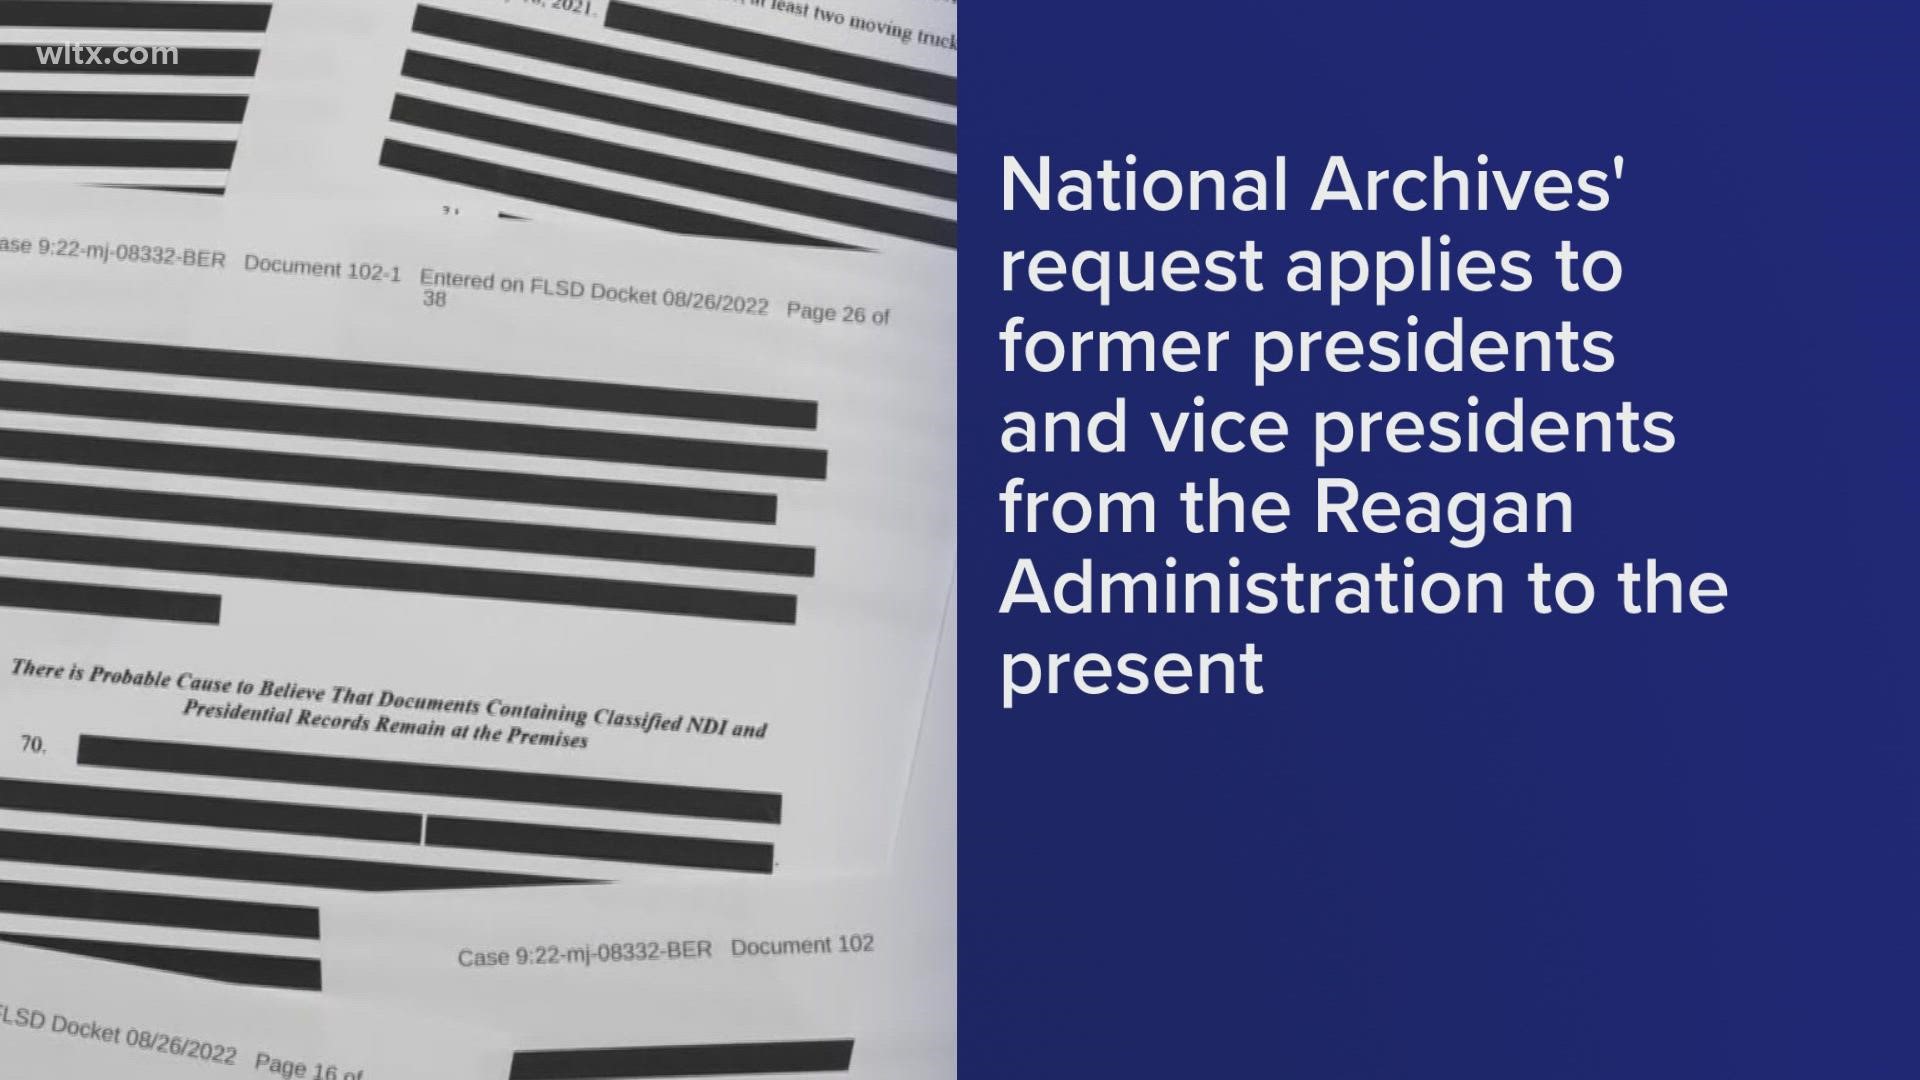 The National Archives has asked former U.S. presidents and vice presidents to recheck their personal records for any classified documents.